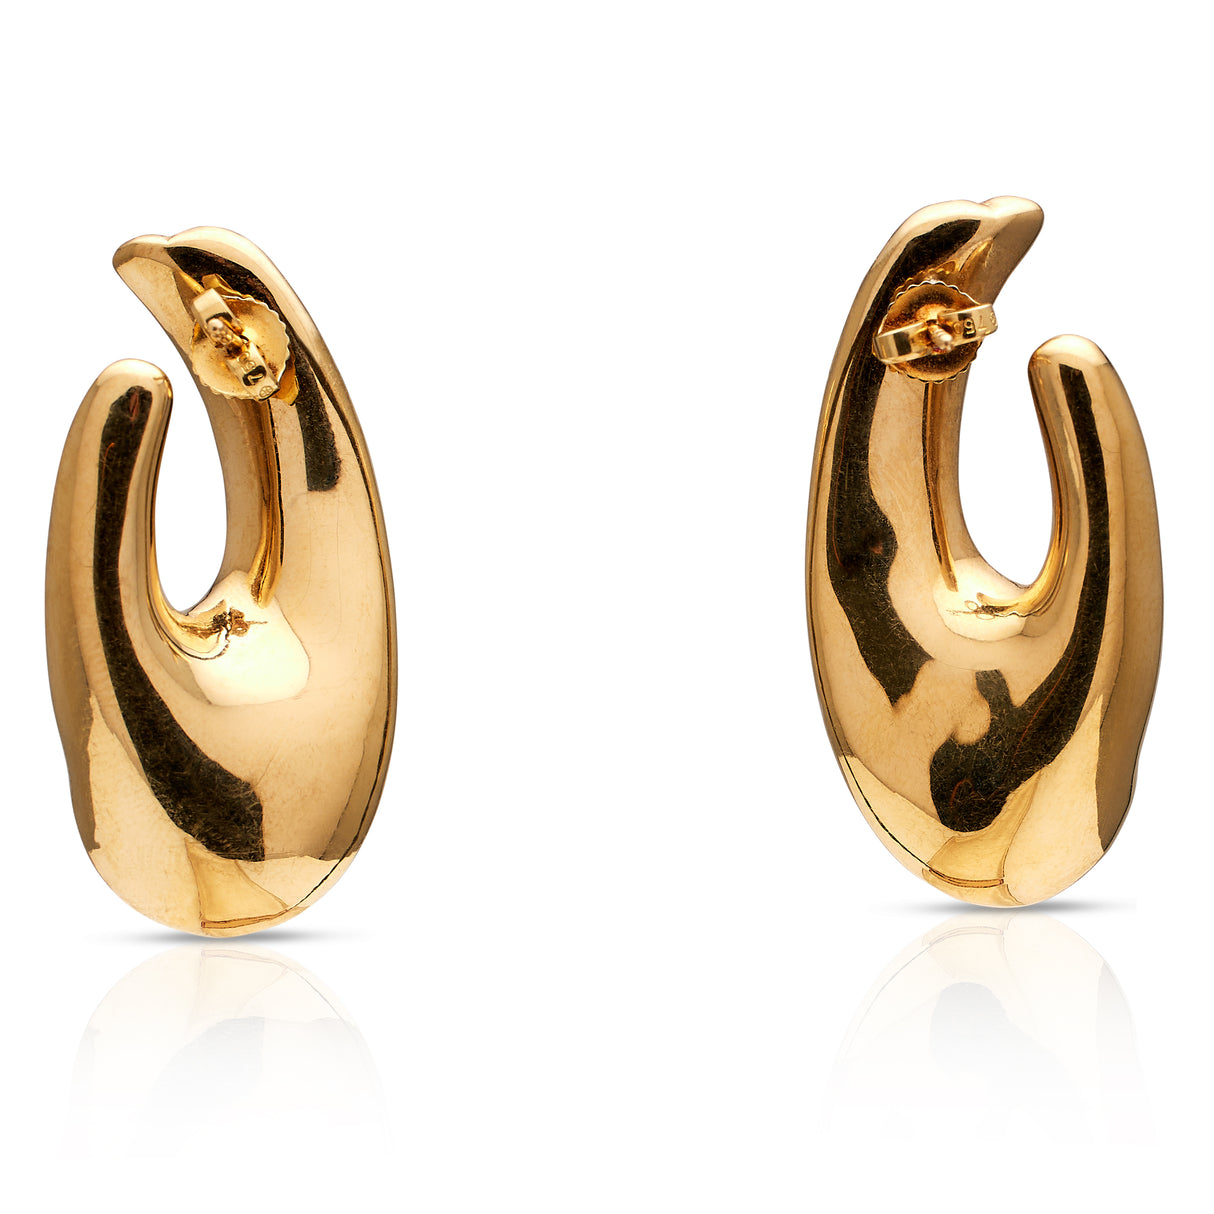 Large 14ct yellow gold earrings, 1980s